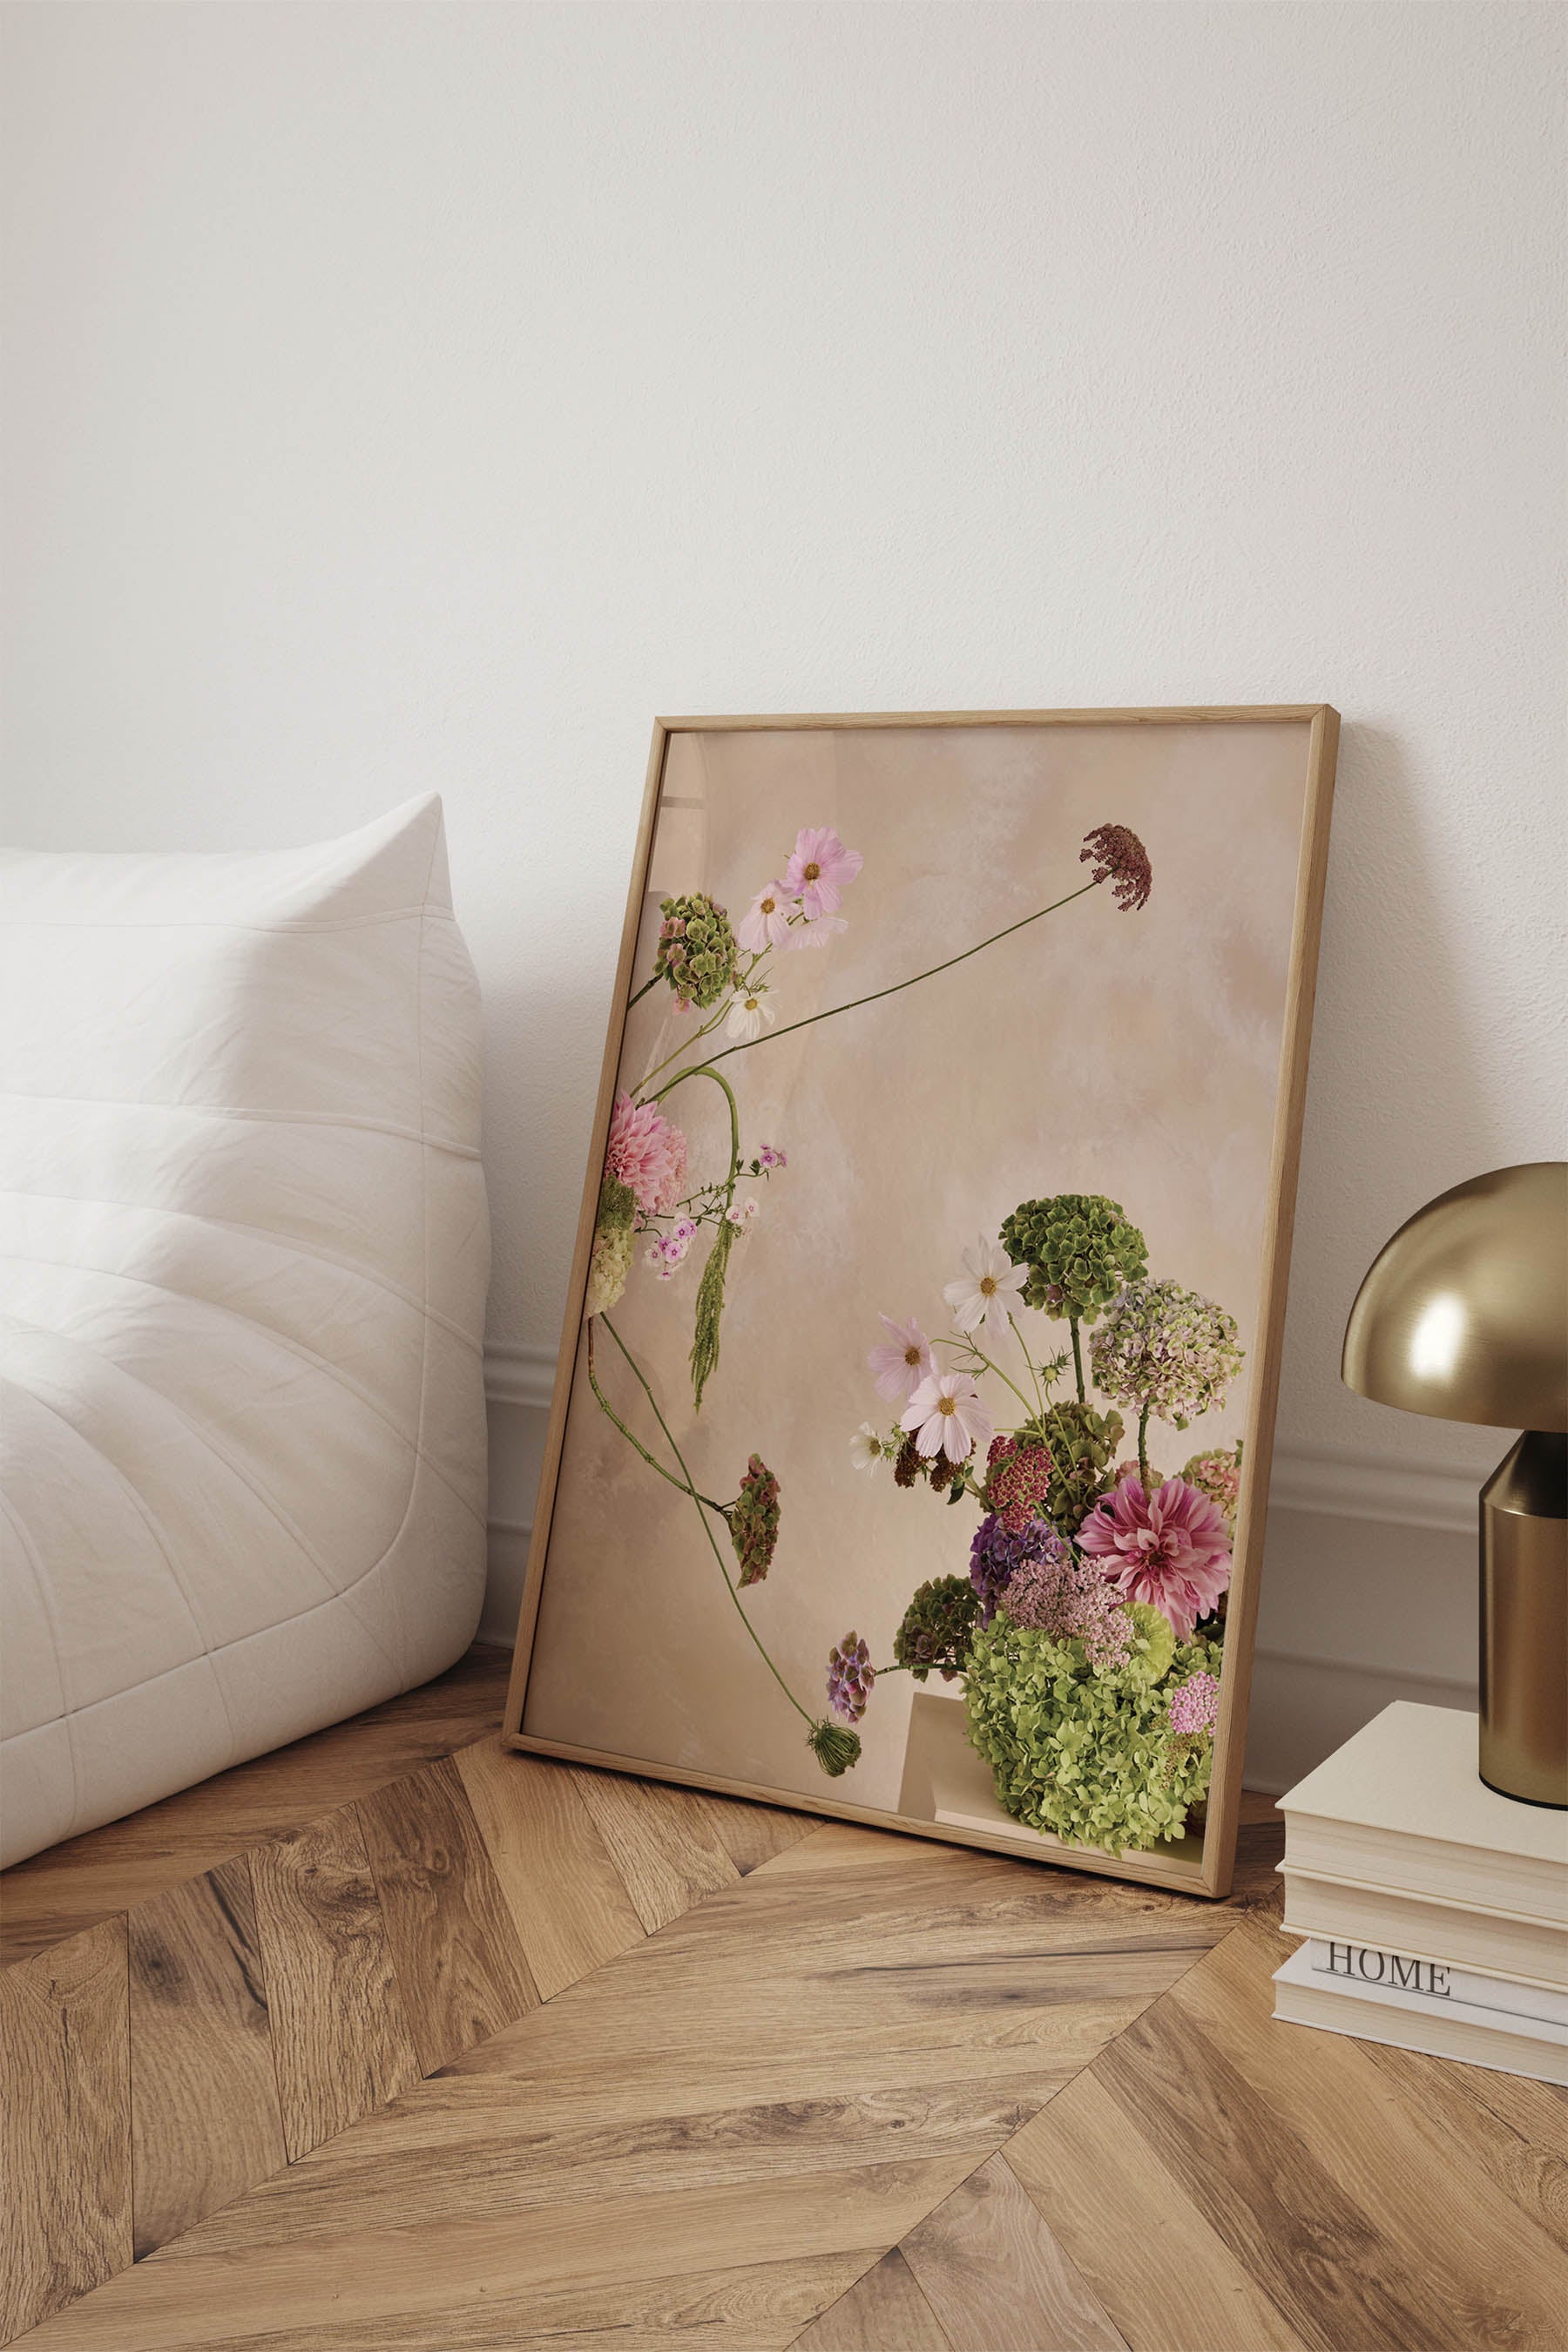 Whimsical Floral Abstract Arrangement against a Linen colour hand painted background Fine Art Print By Austin Bloom A1 size framed in oak leaning against a wall on a herringbone timber floor.